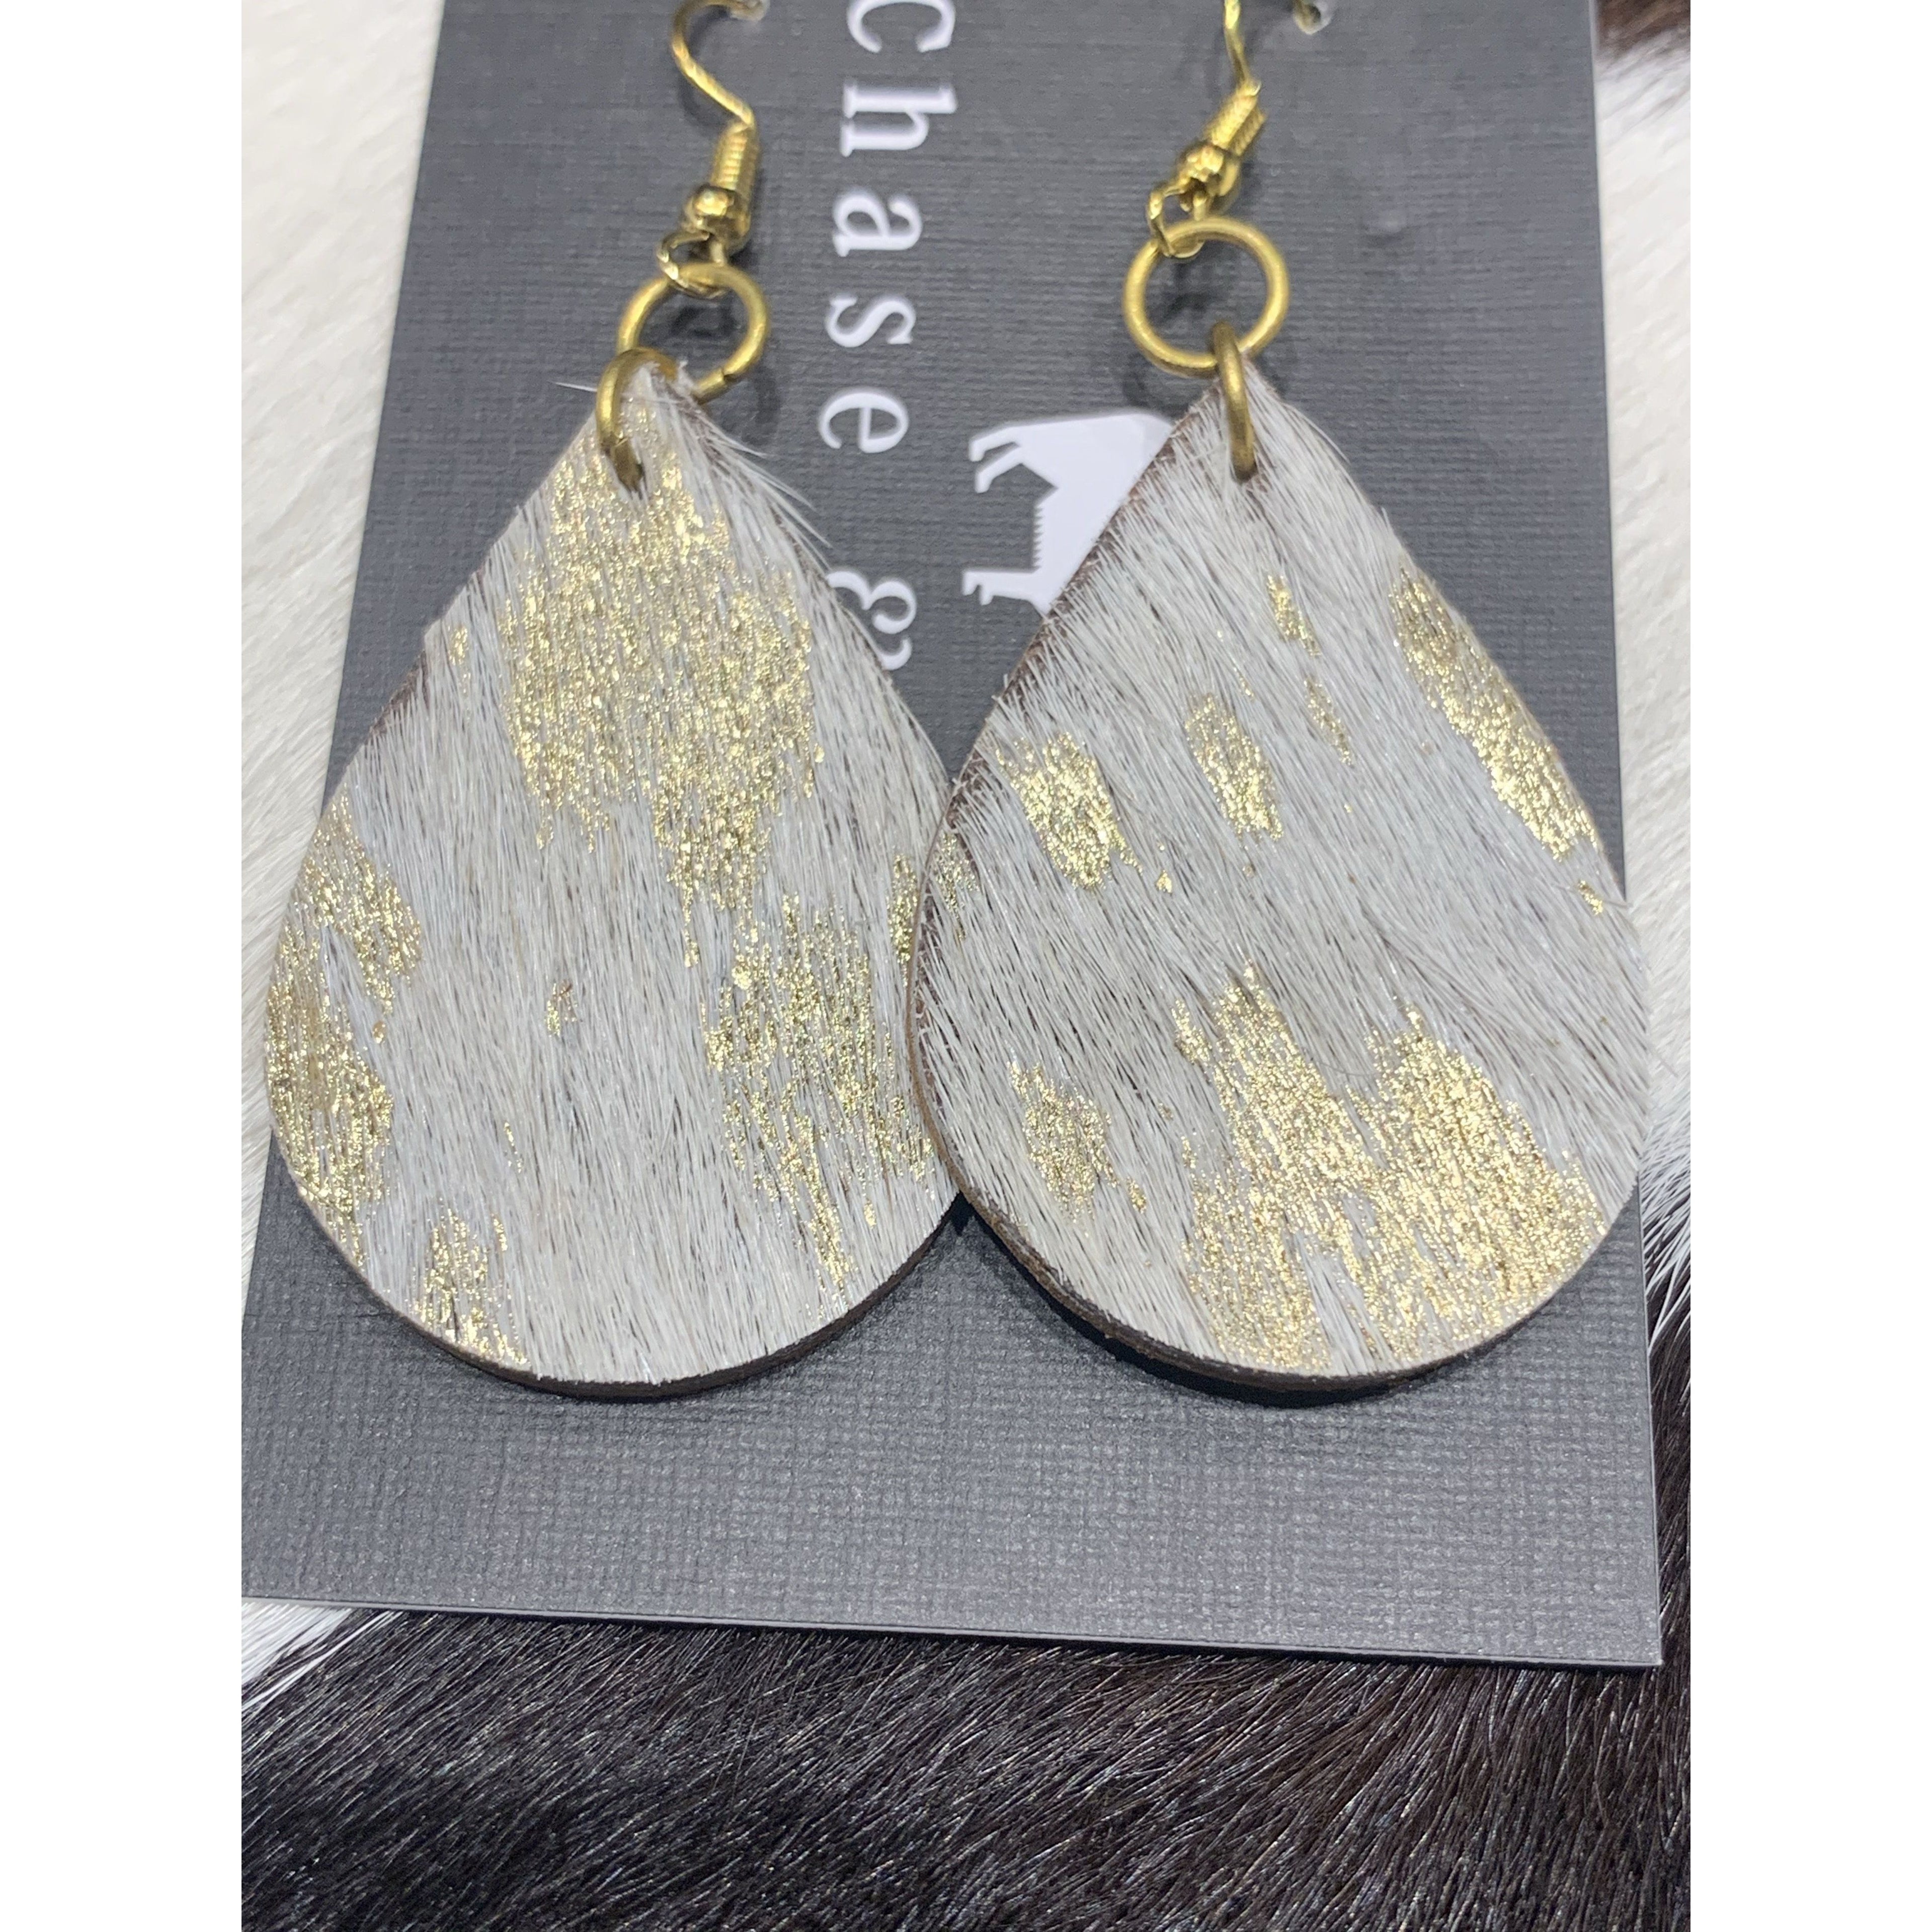 hide drop earrings white and gold assorted 